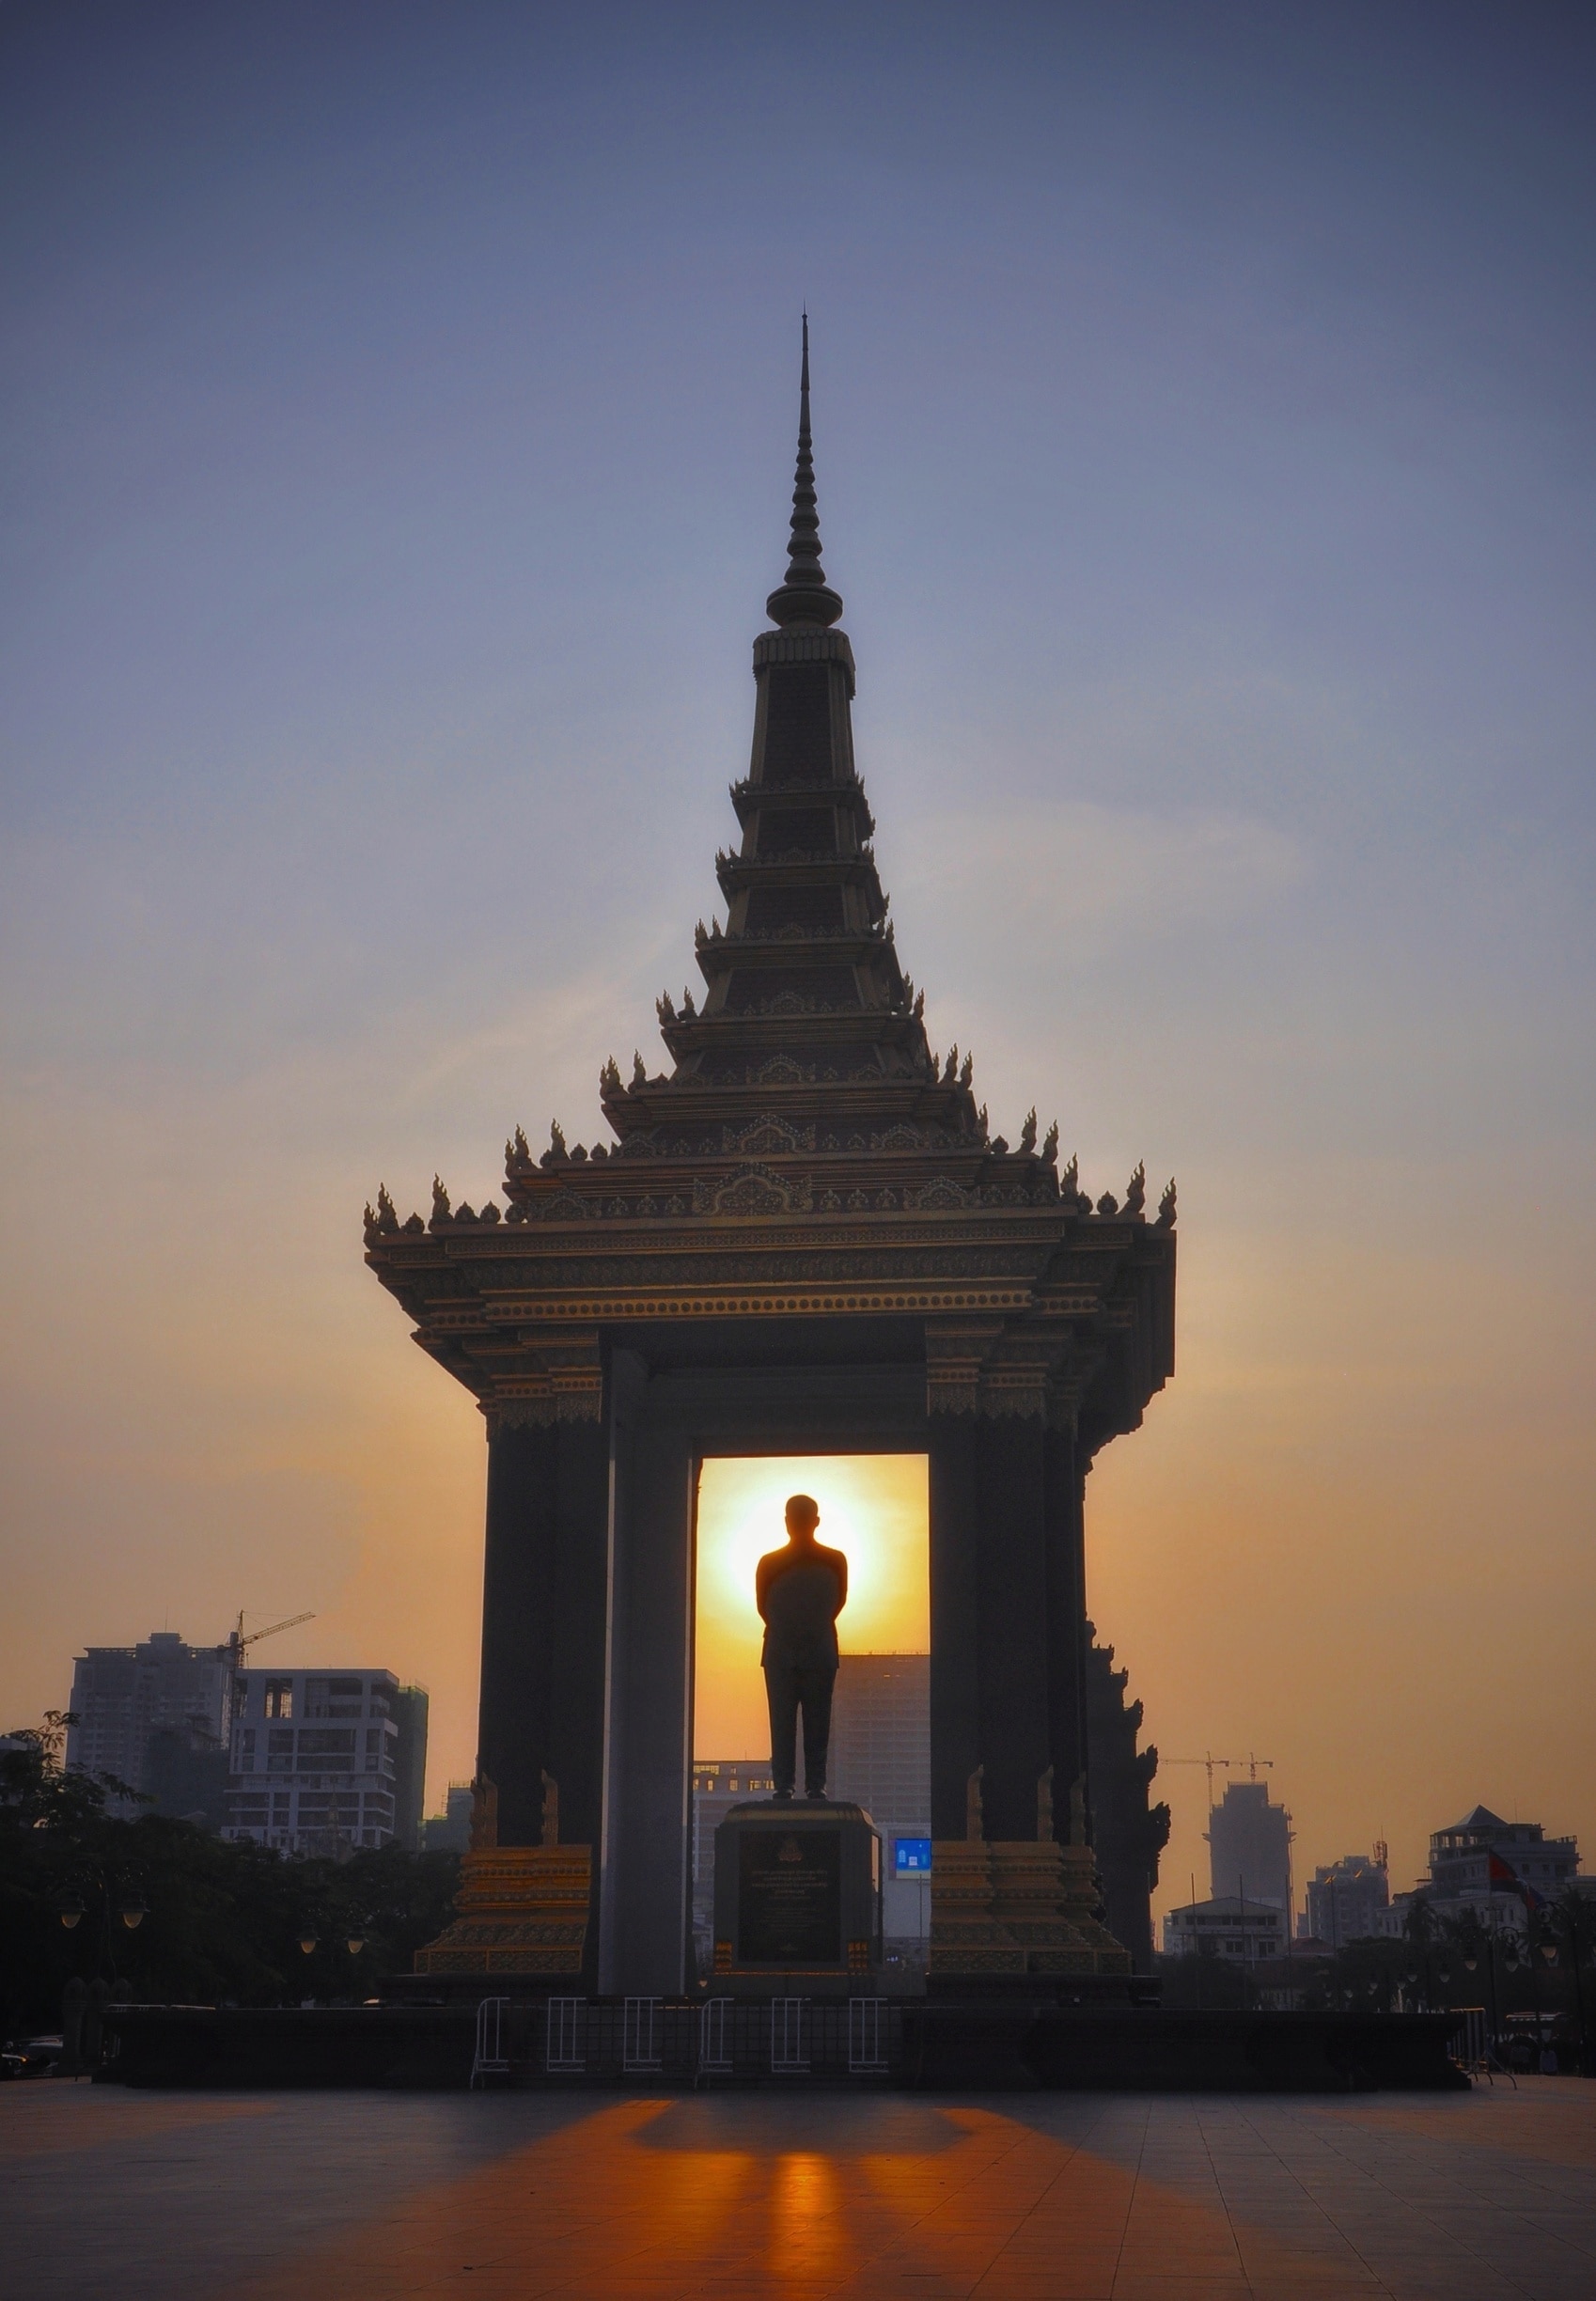 Sun setting behind the Statue of King Father Norodom Sihanouk